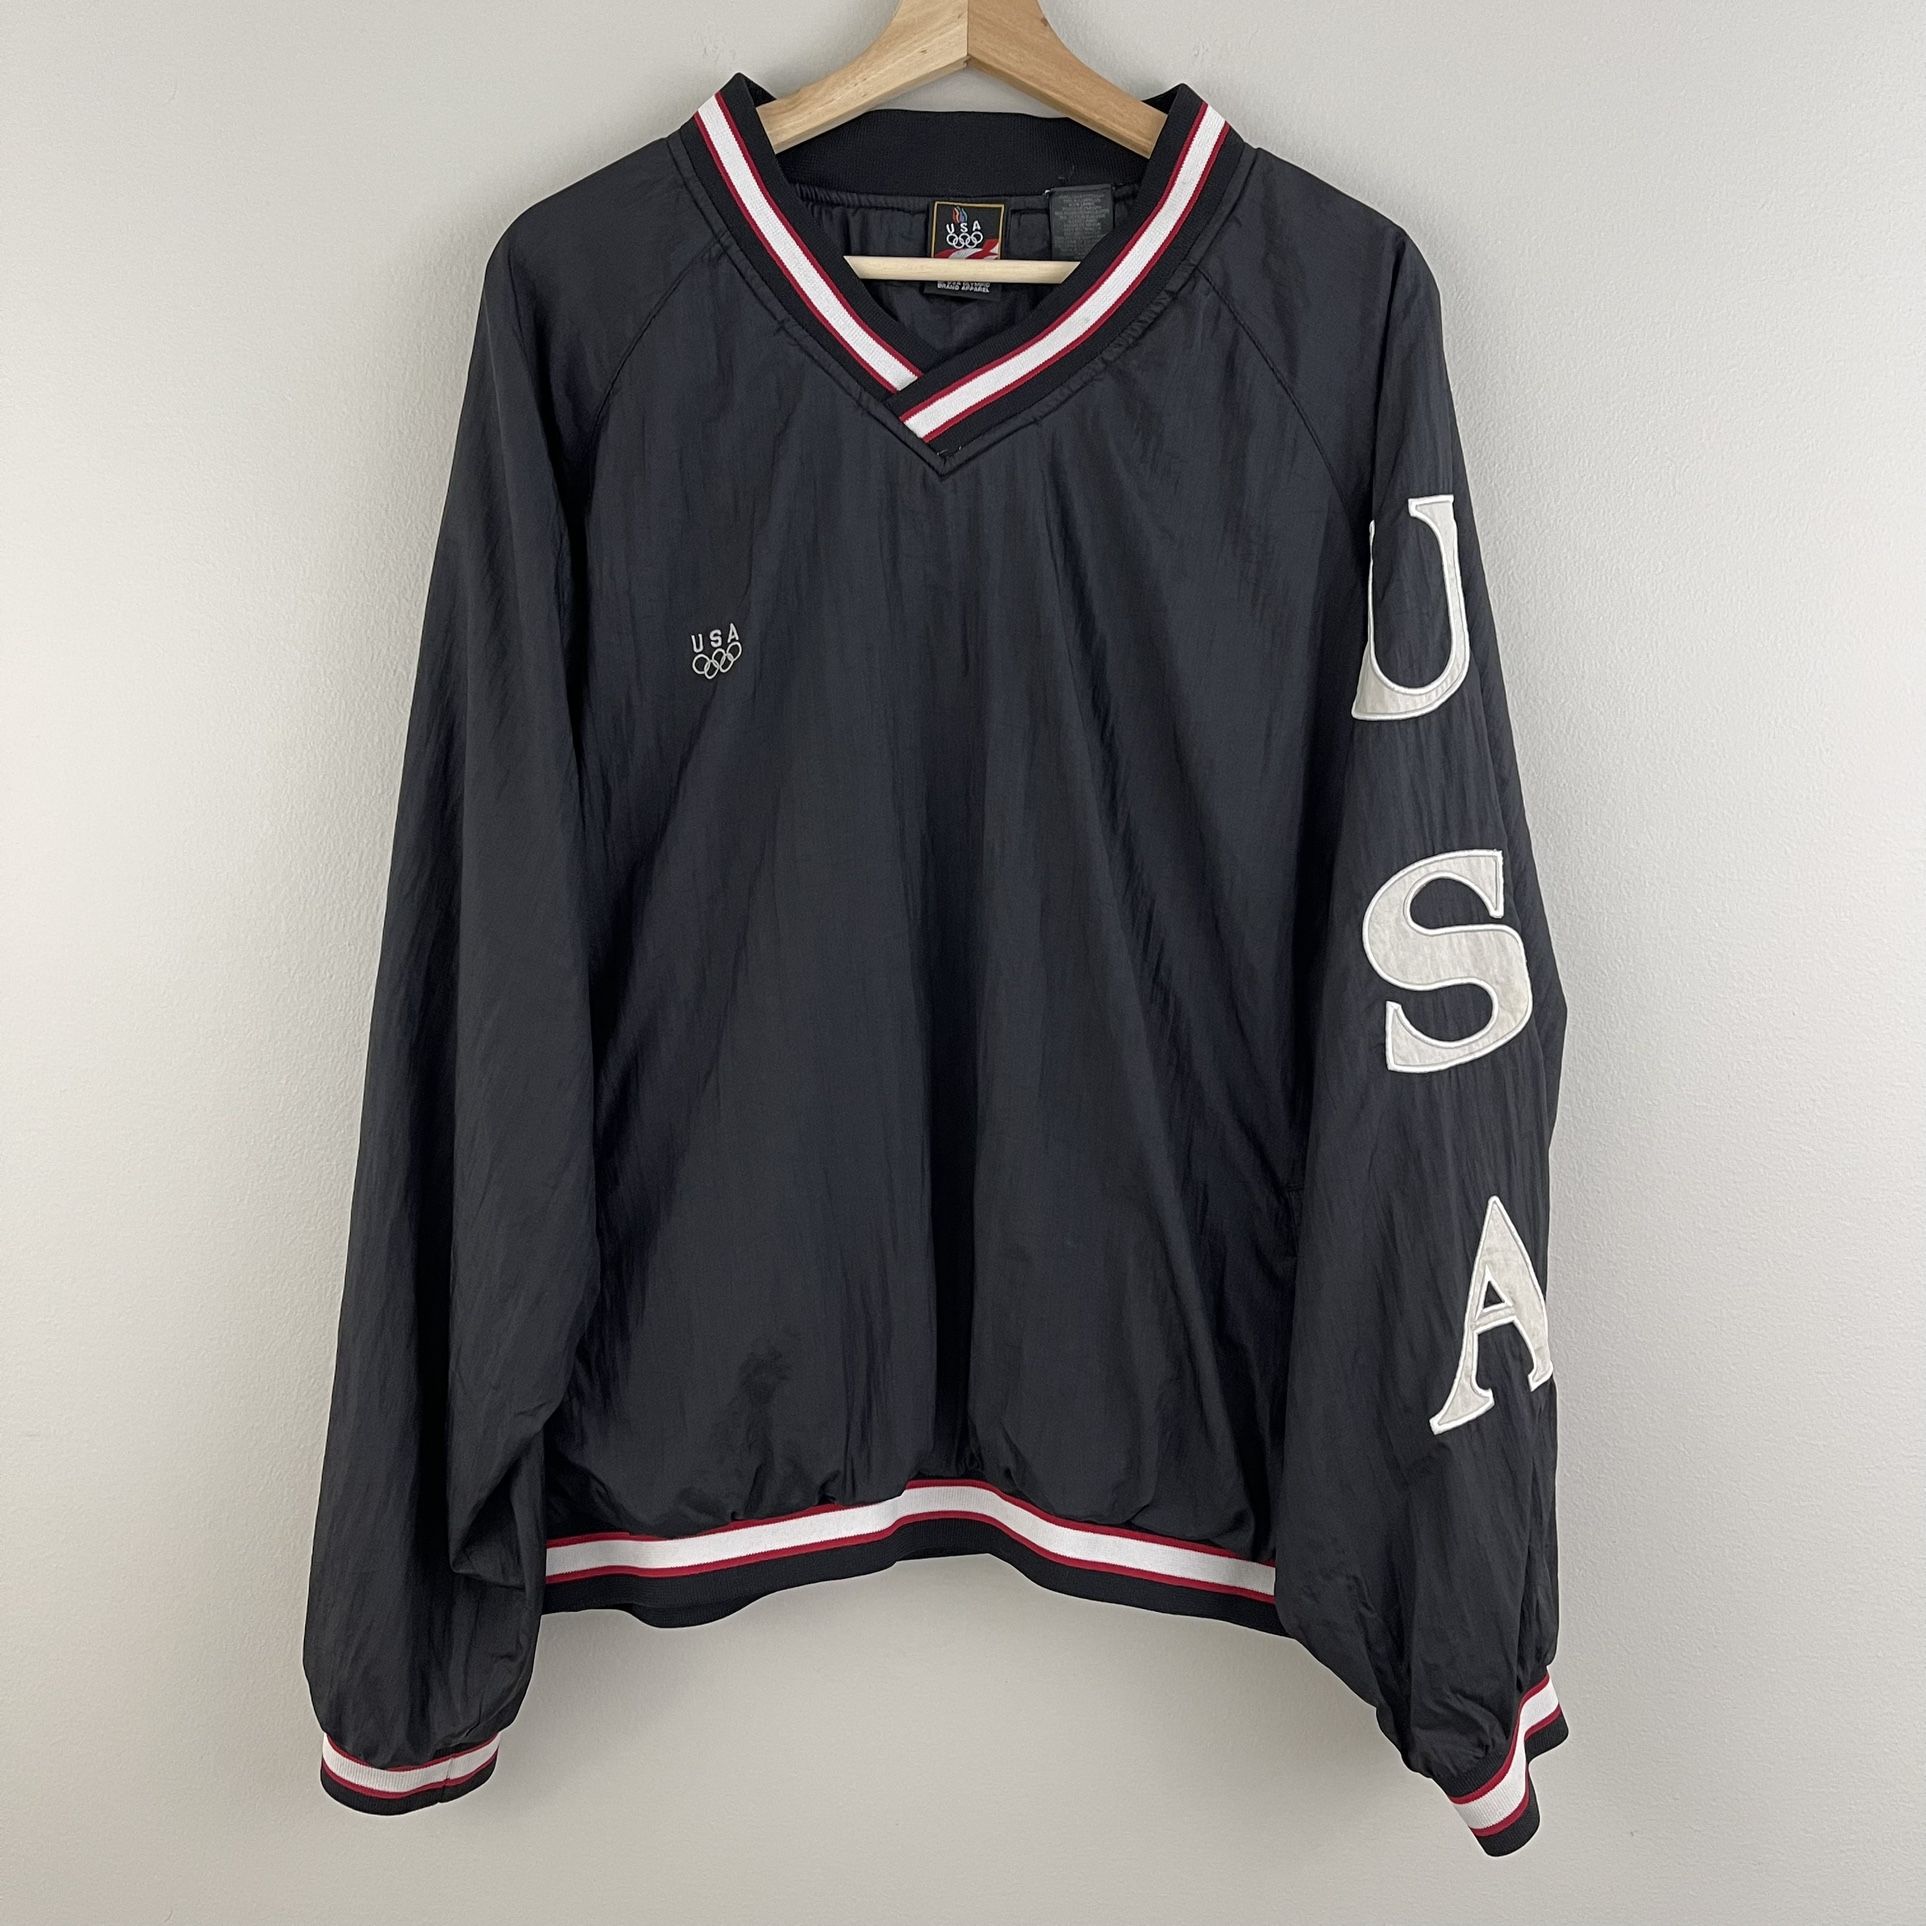 Vintage USA Olympic Black White Graphic Windbreaker Track Pullover Jacket